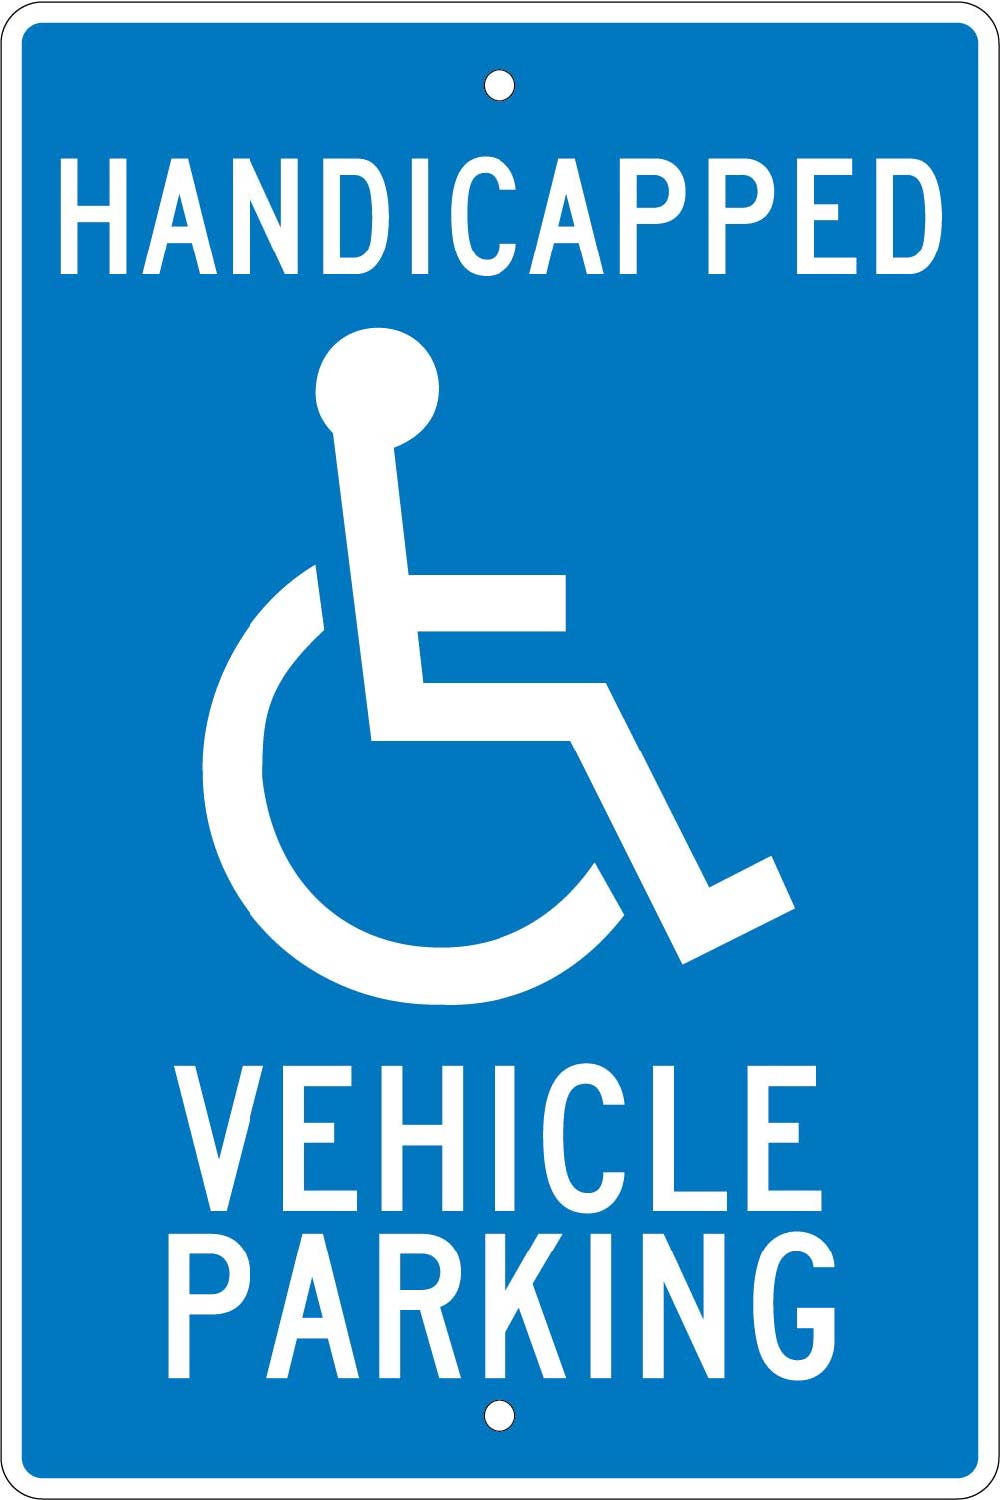 Handicapped Vehicle Parking Sign-eSafety Supplies, Inc